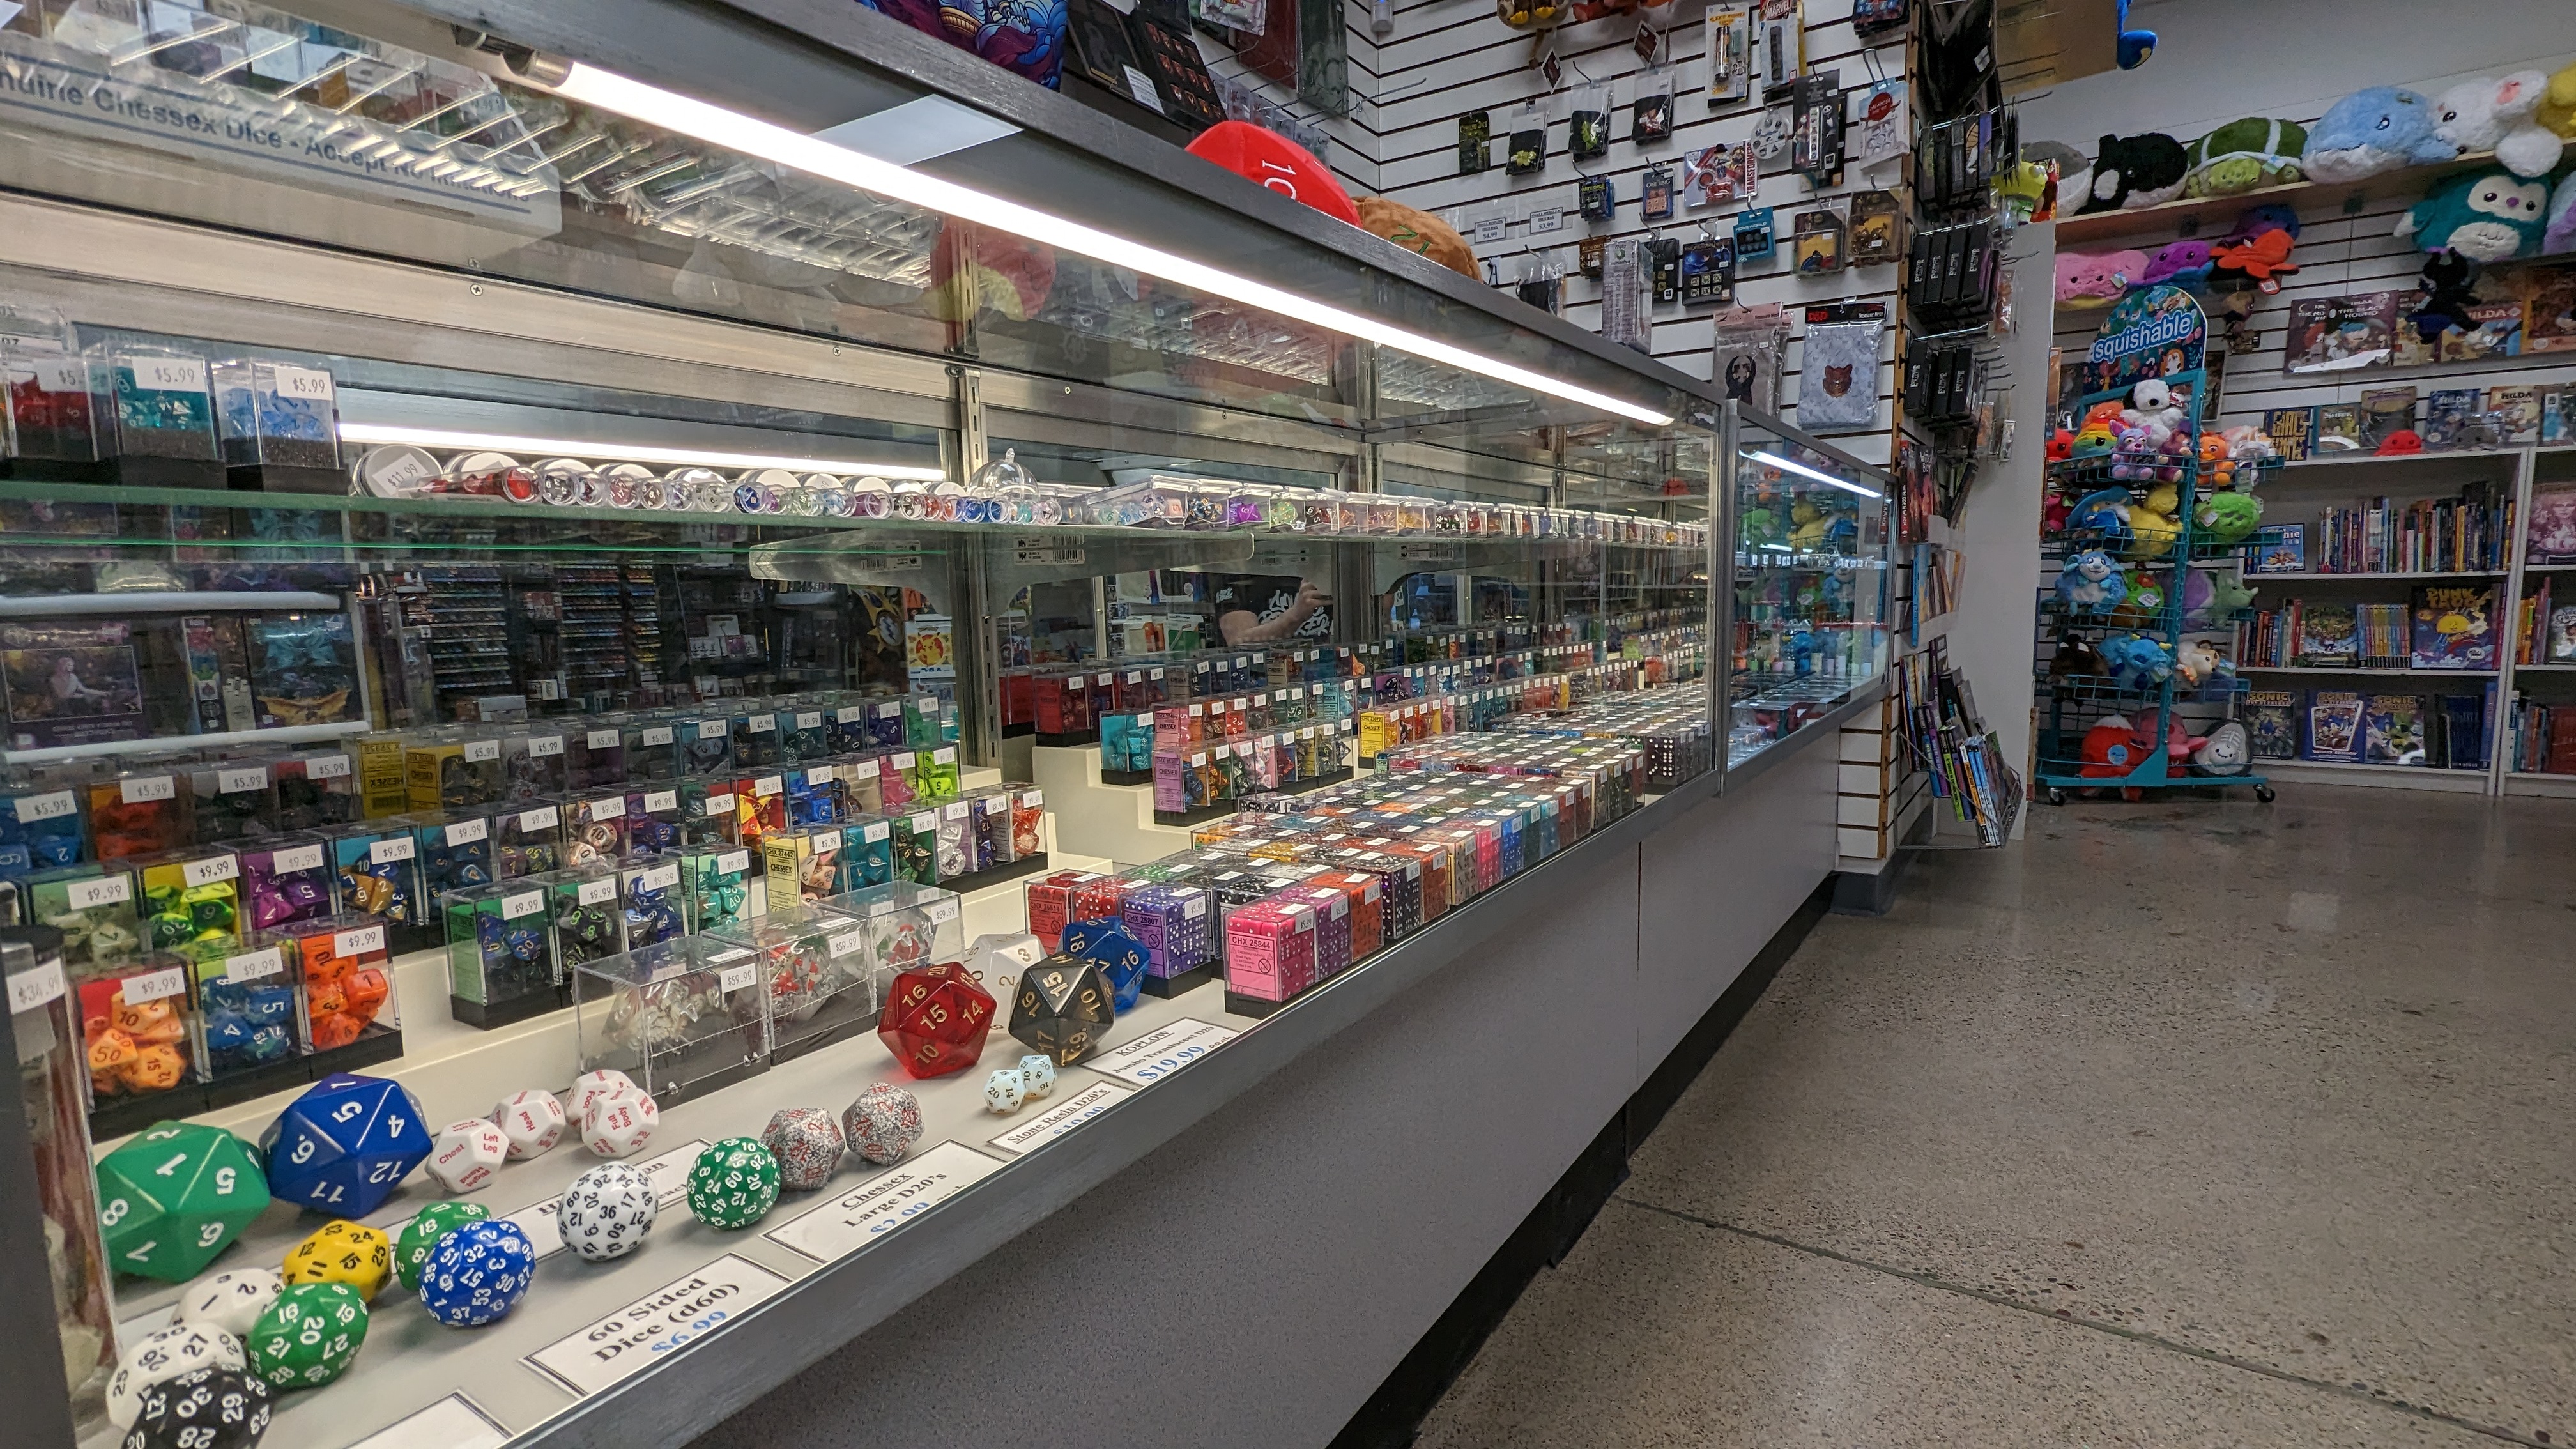 Rows of dice and sundry items